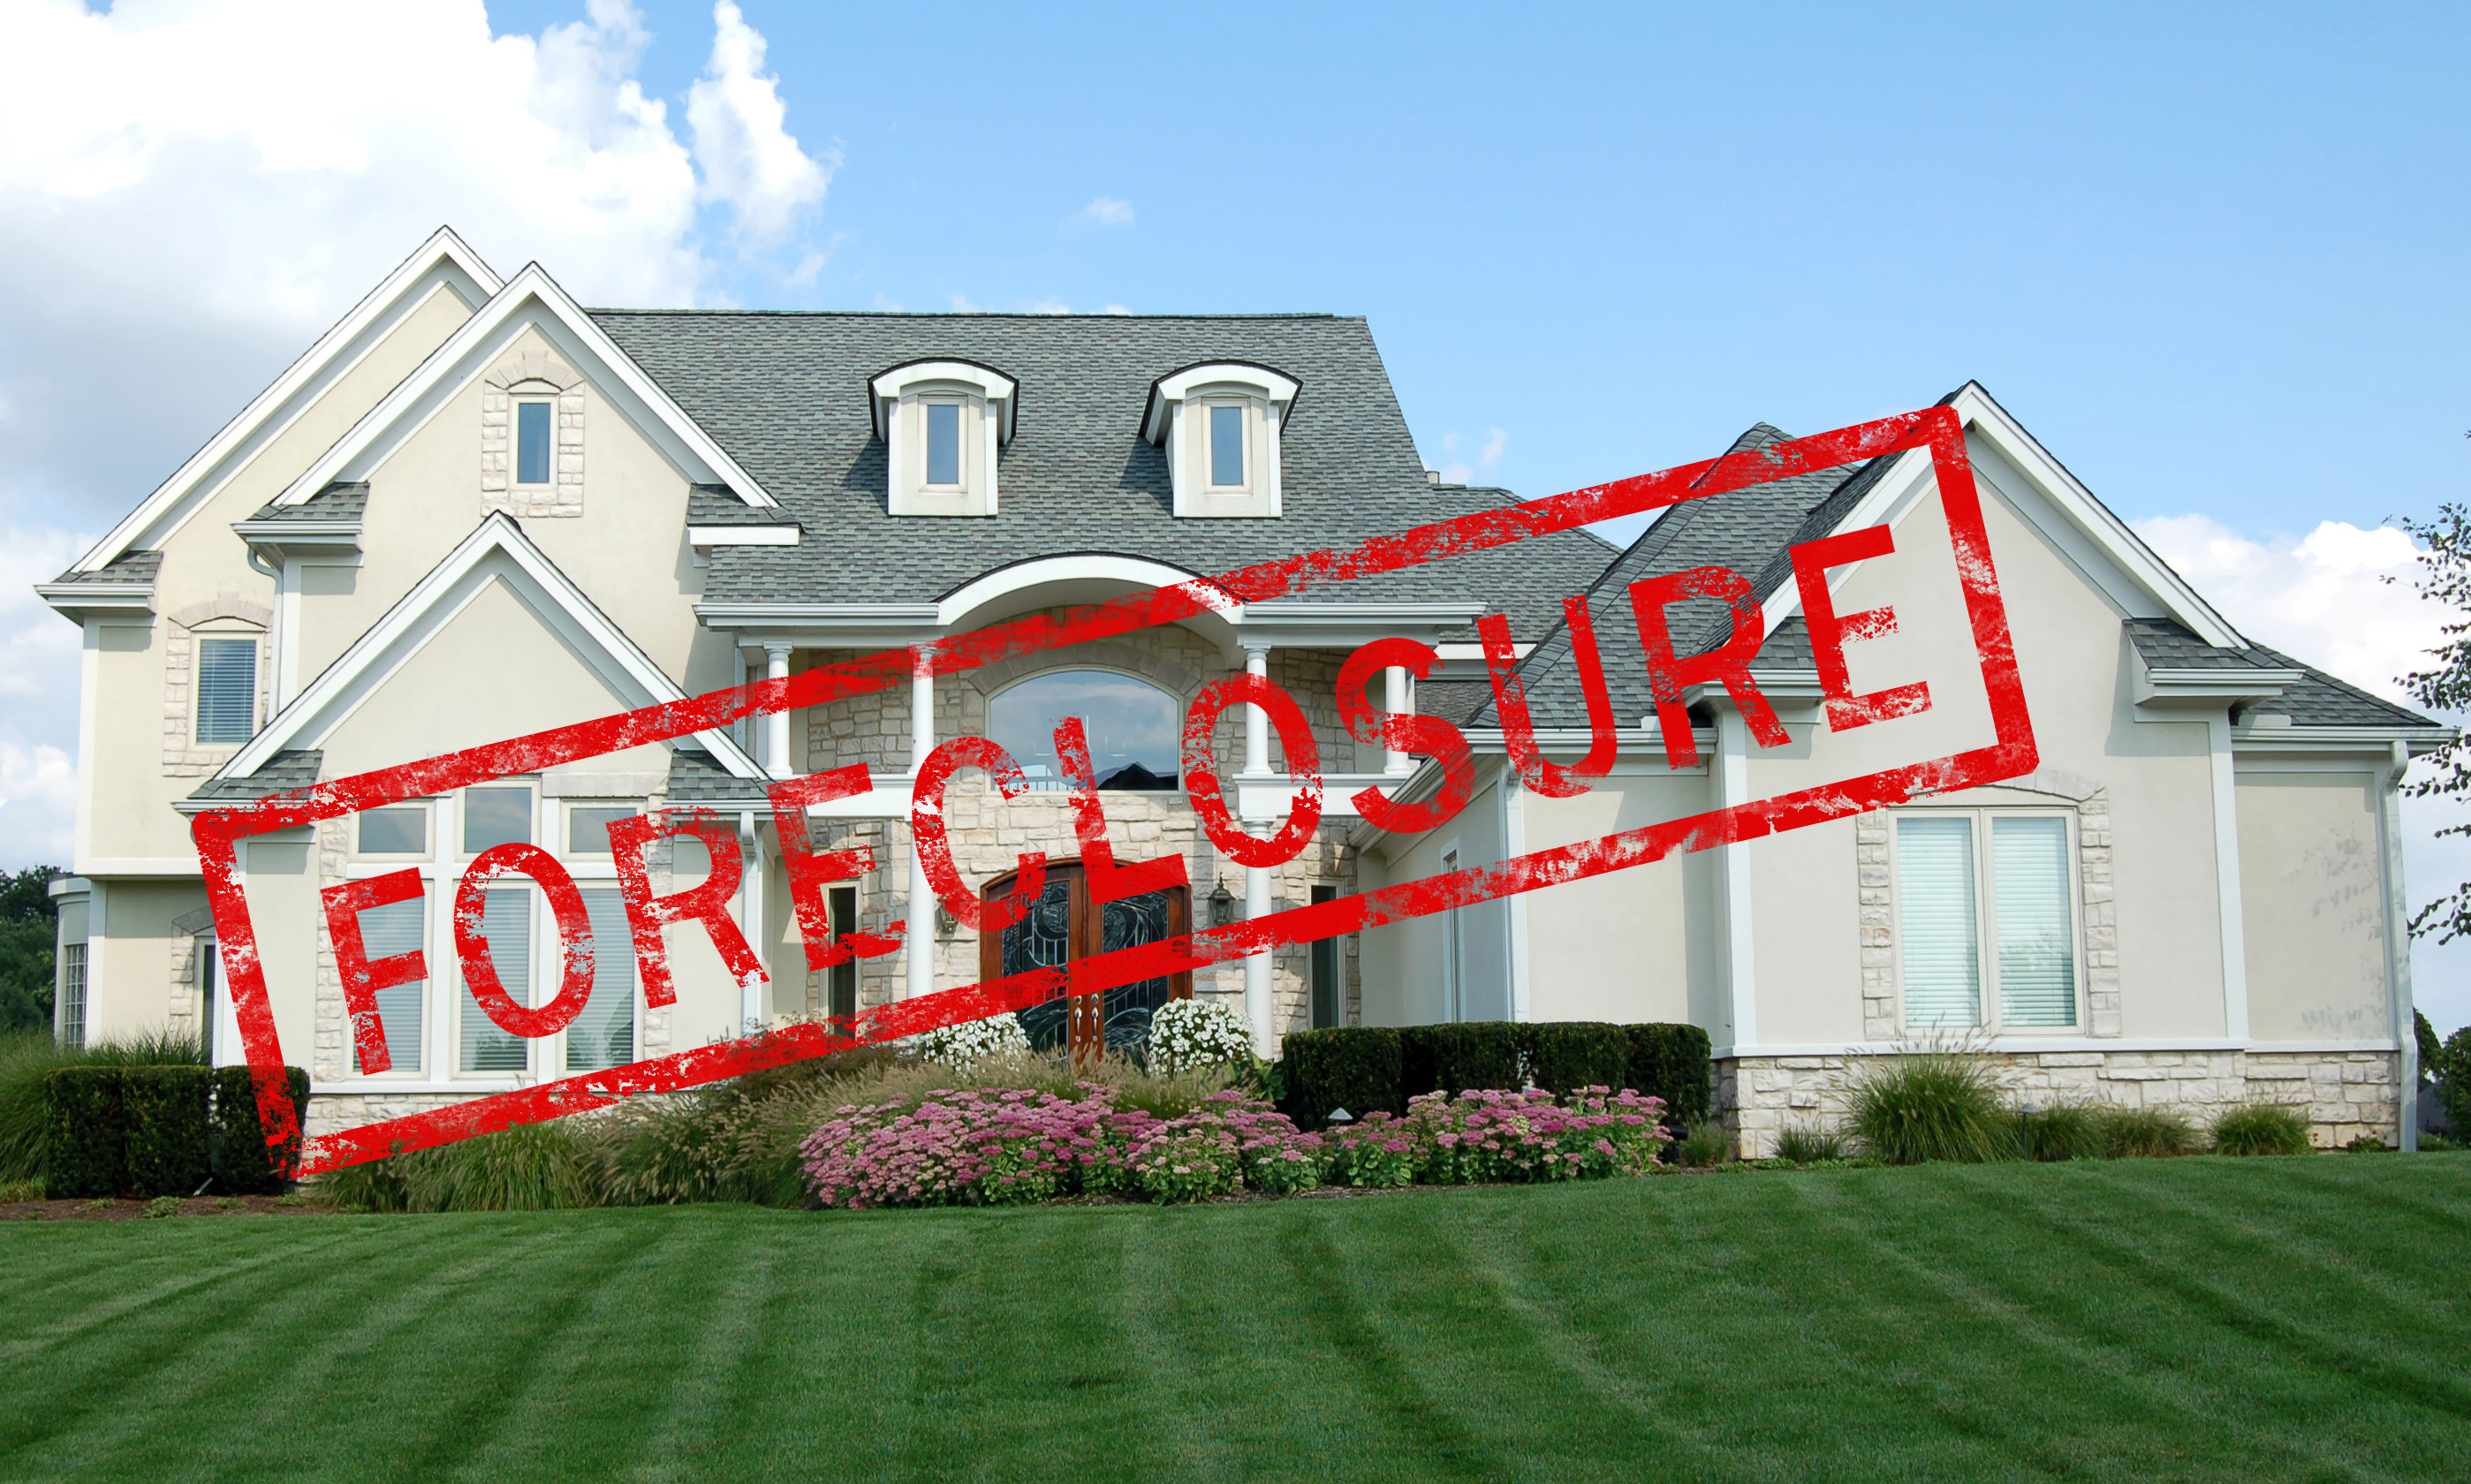 Call ABJ Appraisals when you need valuations of Clark foreclosures